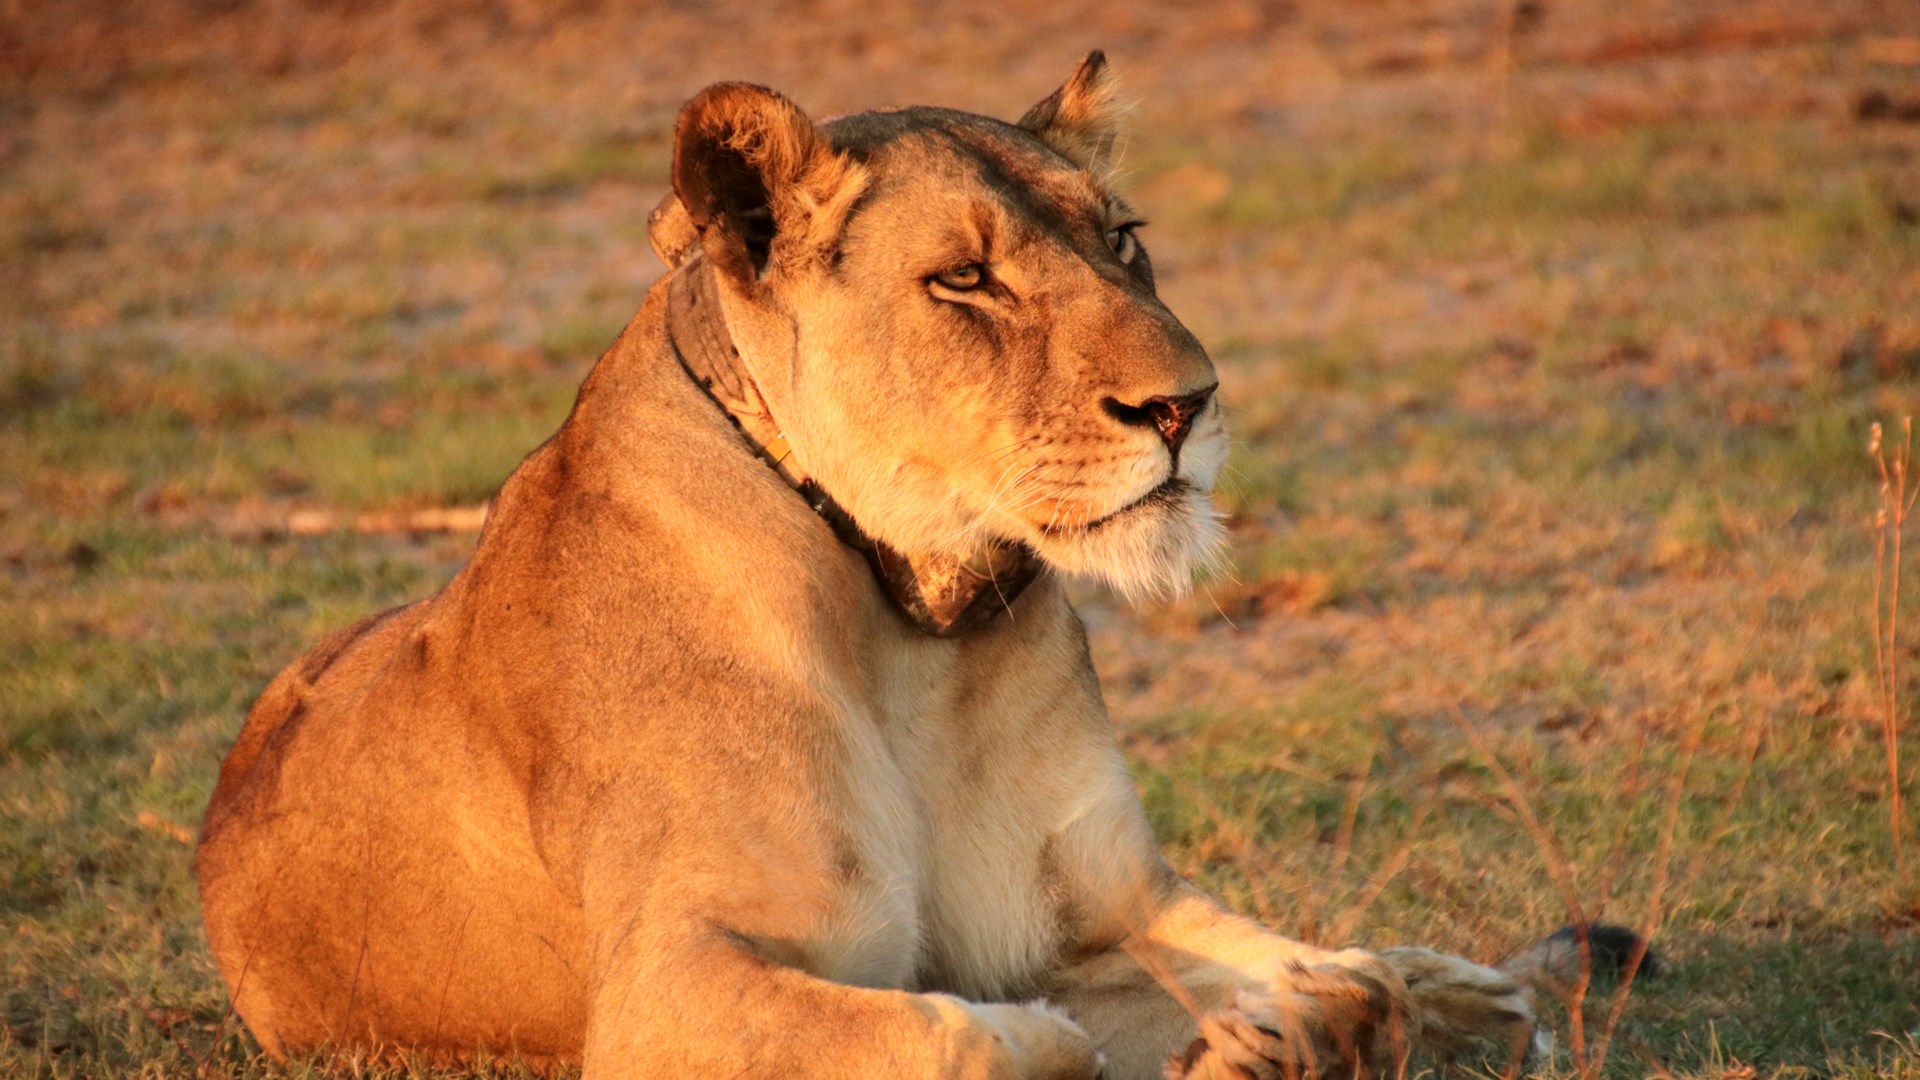 A lion photographed in golden light.